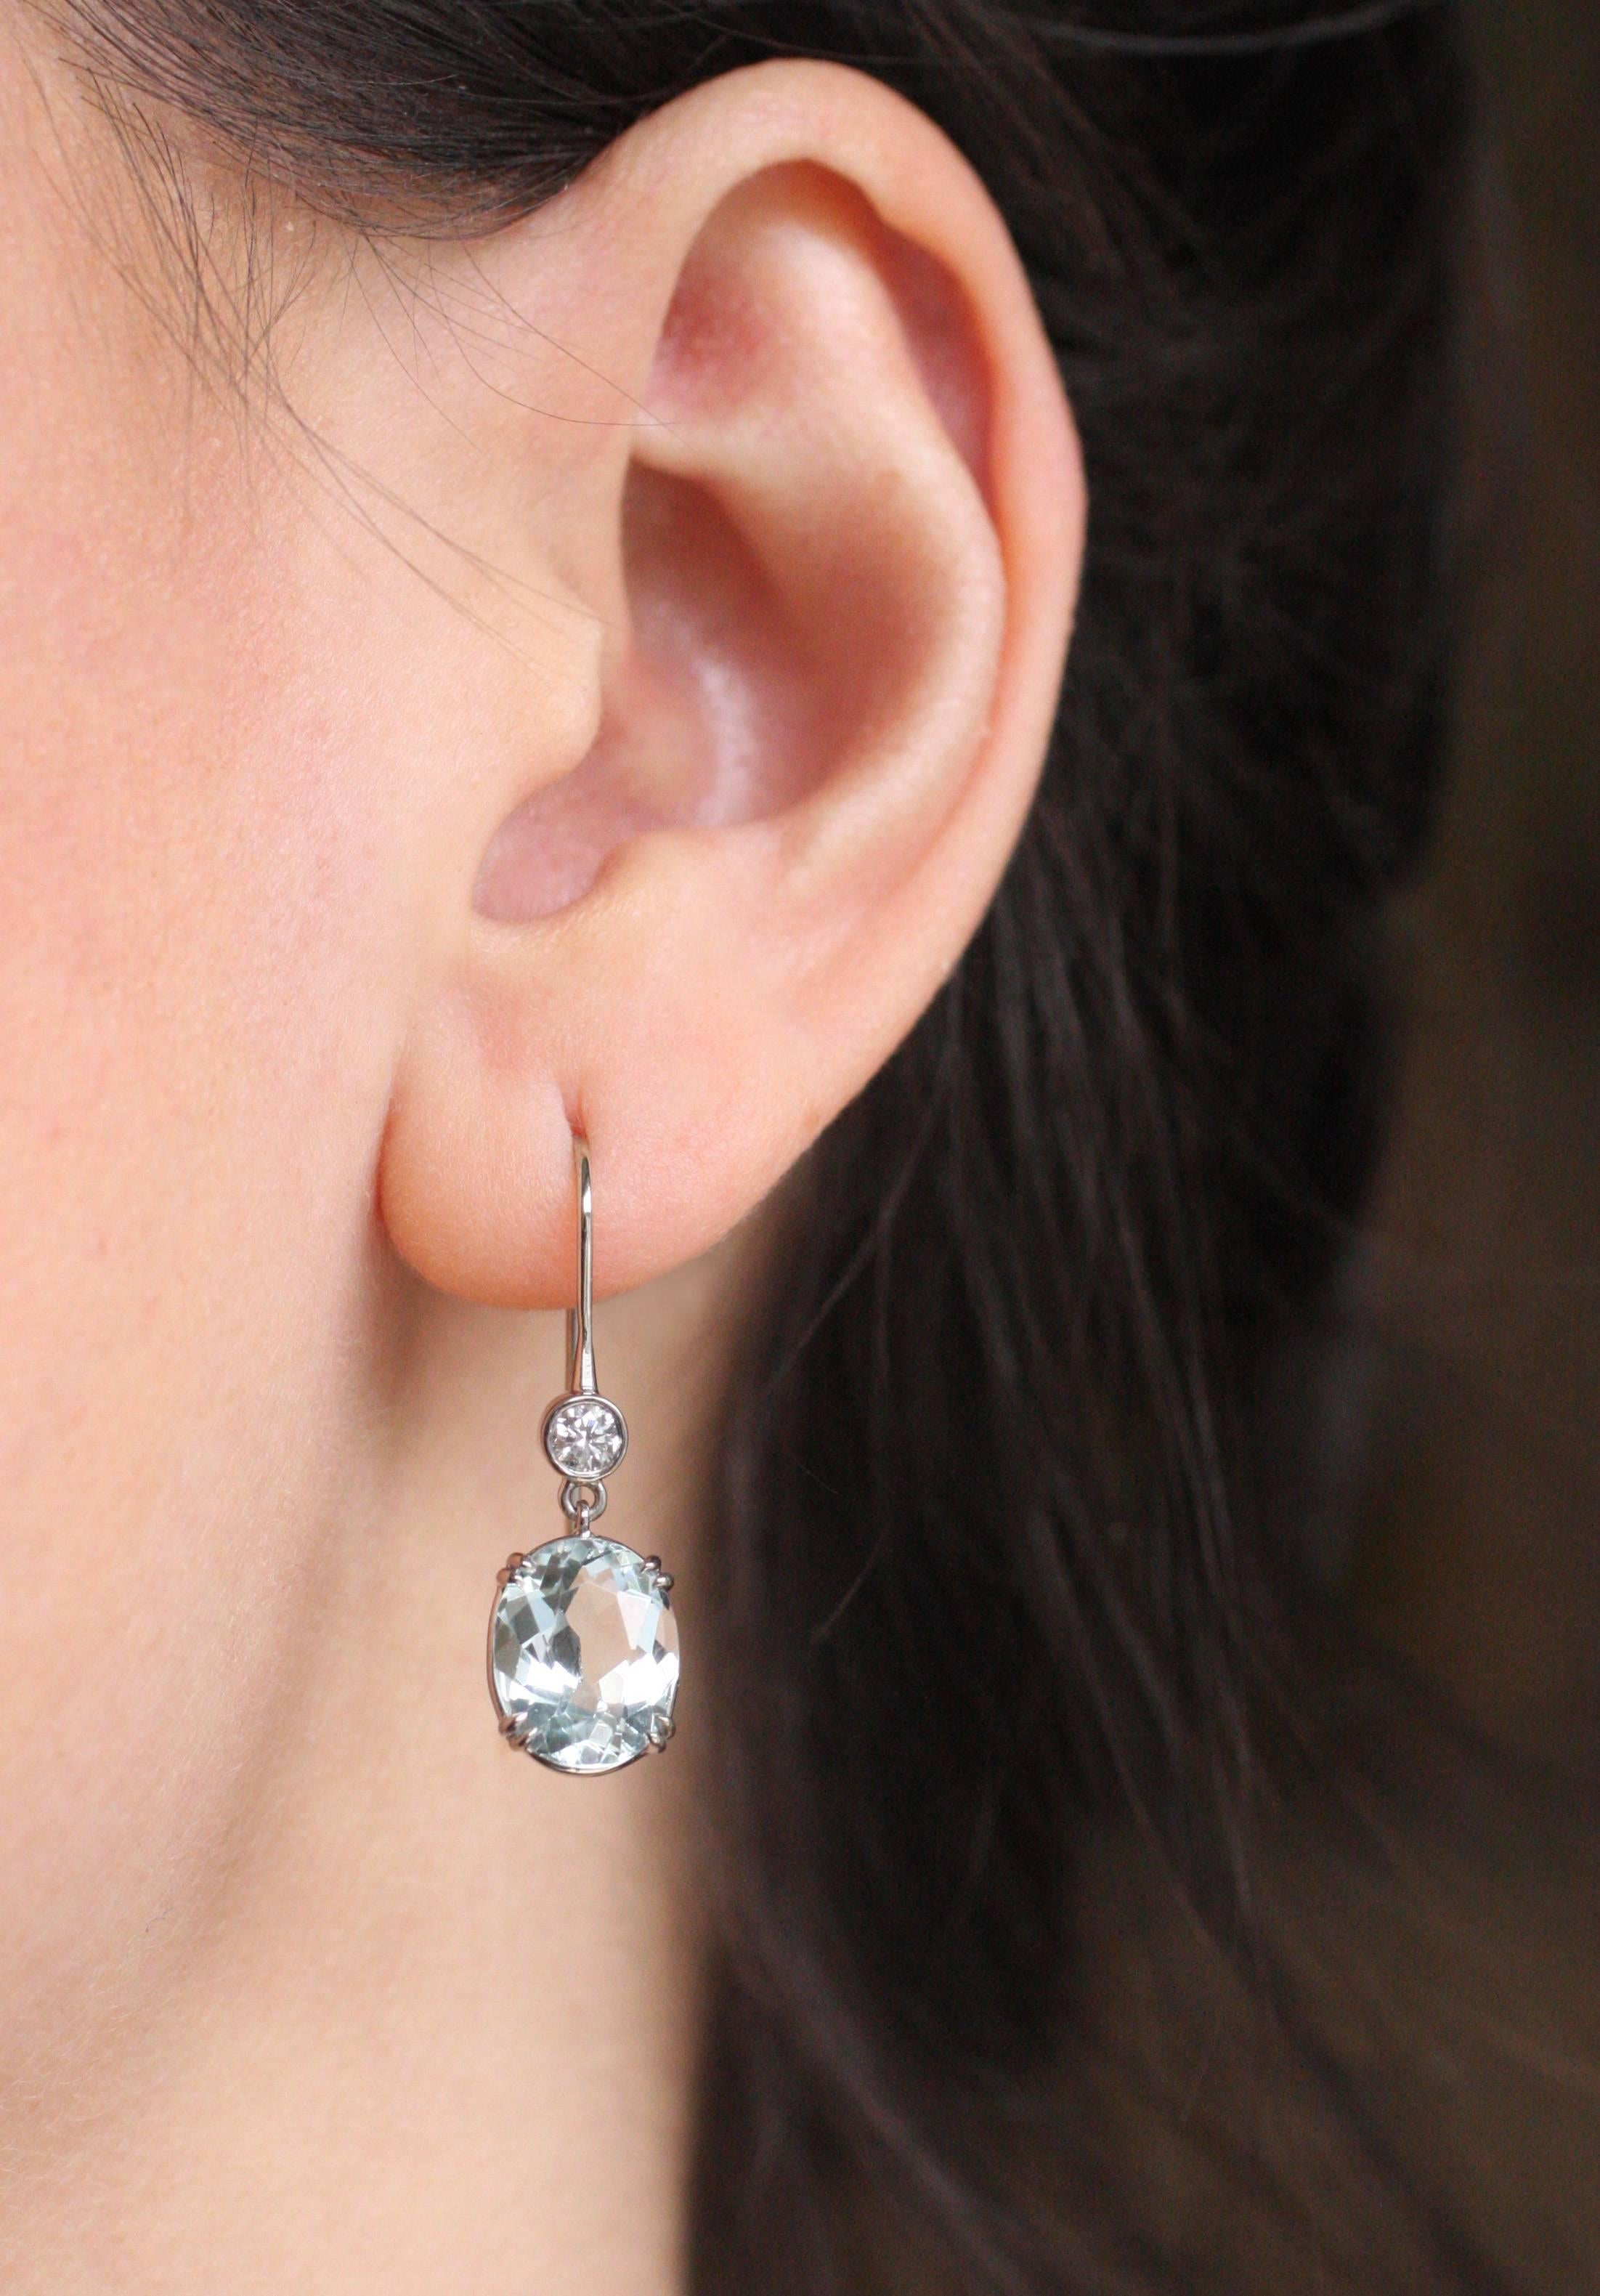 These lovely 18 Kt White Gold earrings contain two brilliant Diamonds and two oval Aquamarine drops (6.10 Carats).  Perfect for the Holidays!

Designed and made in house by Julius Cohen New York.